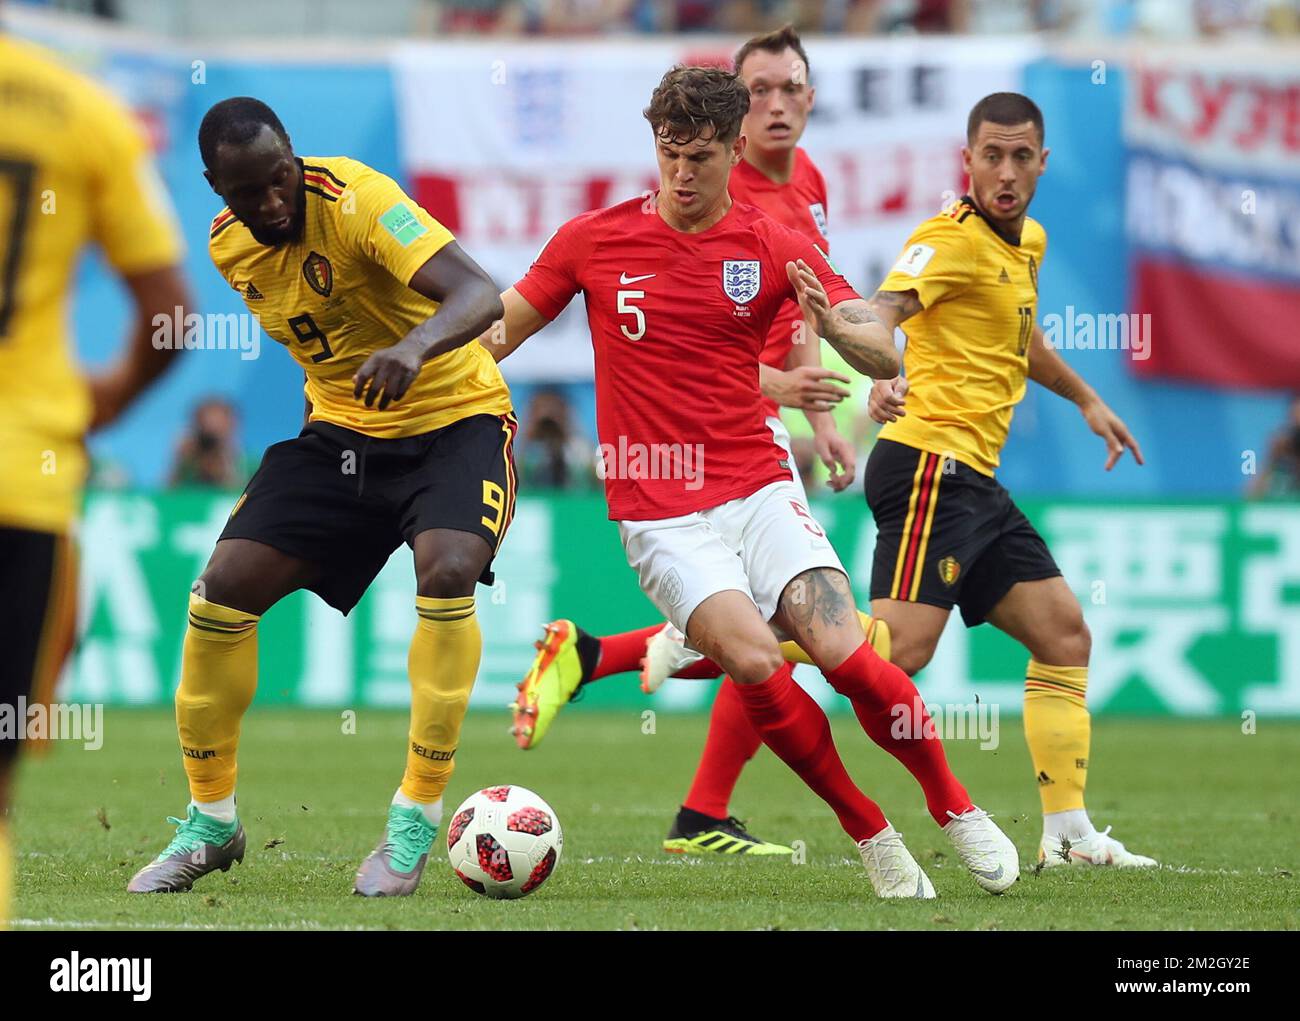 Belgium's Romelu Lukaku and England's John Stones pictured in action during a soccer game between Belgian national soccer team the Red Devils and England, the third place play-off of the 2018 FIFA World Cup, Saturday 14 July 2018 in Saint-Petersburg, Russia. BELGA PHOTO BRUNO FAHY Stock Photo